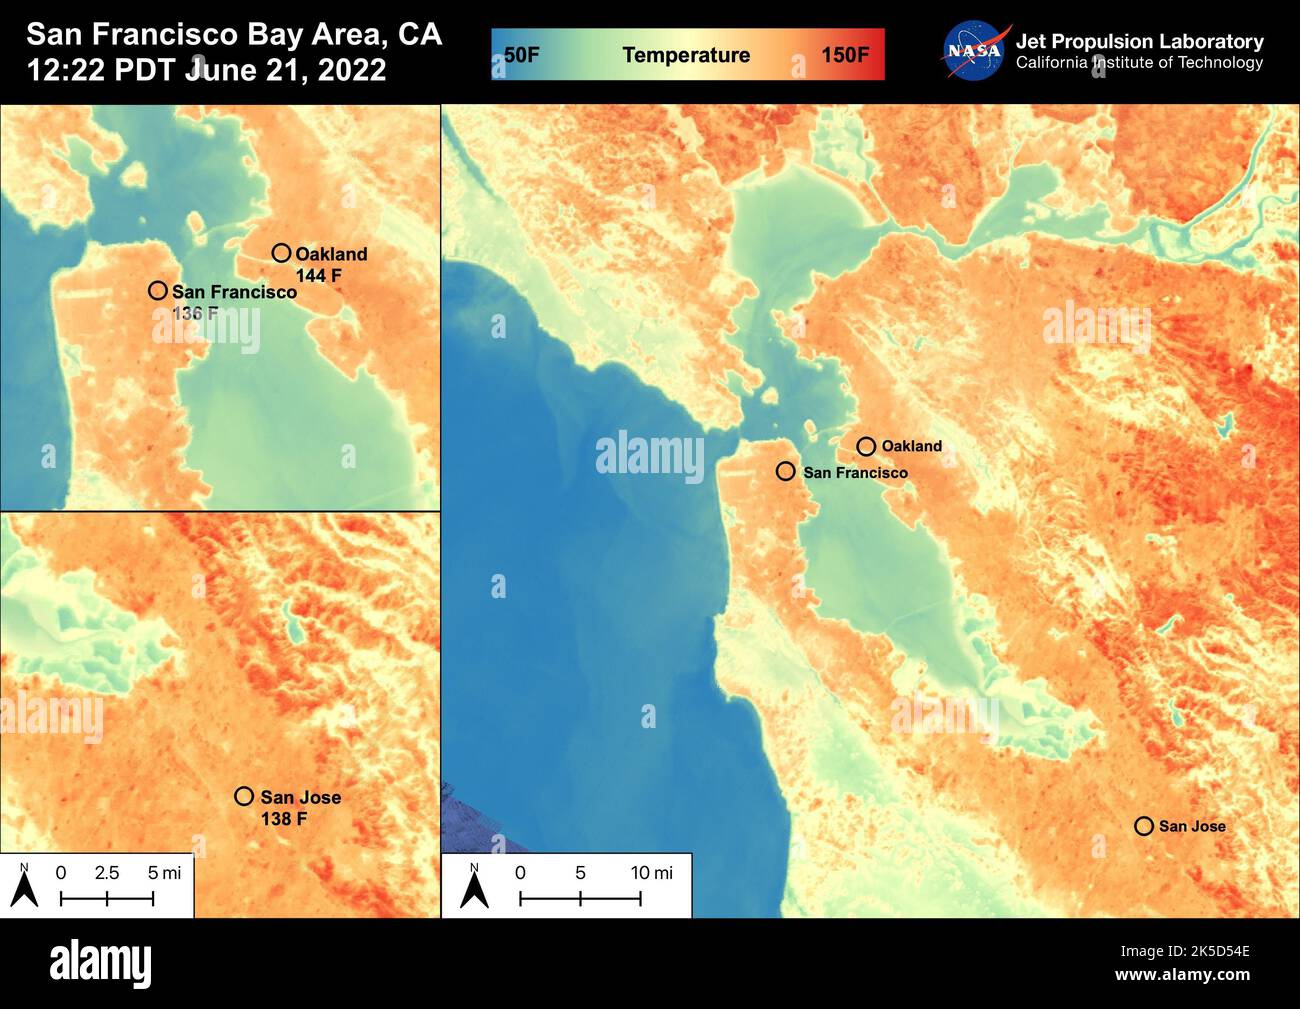 On June 21st, 2022, the San Francisco Bay Area experienced high temperatures as a hot mass of air remained over the region. San Francisco reached 92 degrees Fahrenheit, Oakland reached 98 degrees Fahrenheit, and San Jose reached 102 degrees Fahrenheit. The Land Surface Temperatures at 12 22 PM PDT ranged from 60 degrees Fahrenheit to 150 degrees Fahrenheit for this region with water temperatures ranging from 50 degrees Fahrenheit to 90 degrees Fahrenheit. ECOSTRESS is a thermal instrument on the International Space Station that measures the temperature of the ground, which is hotter than the a Stock Photo